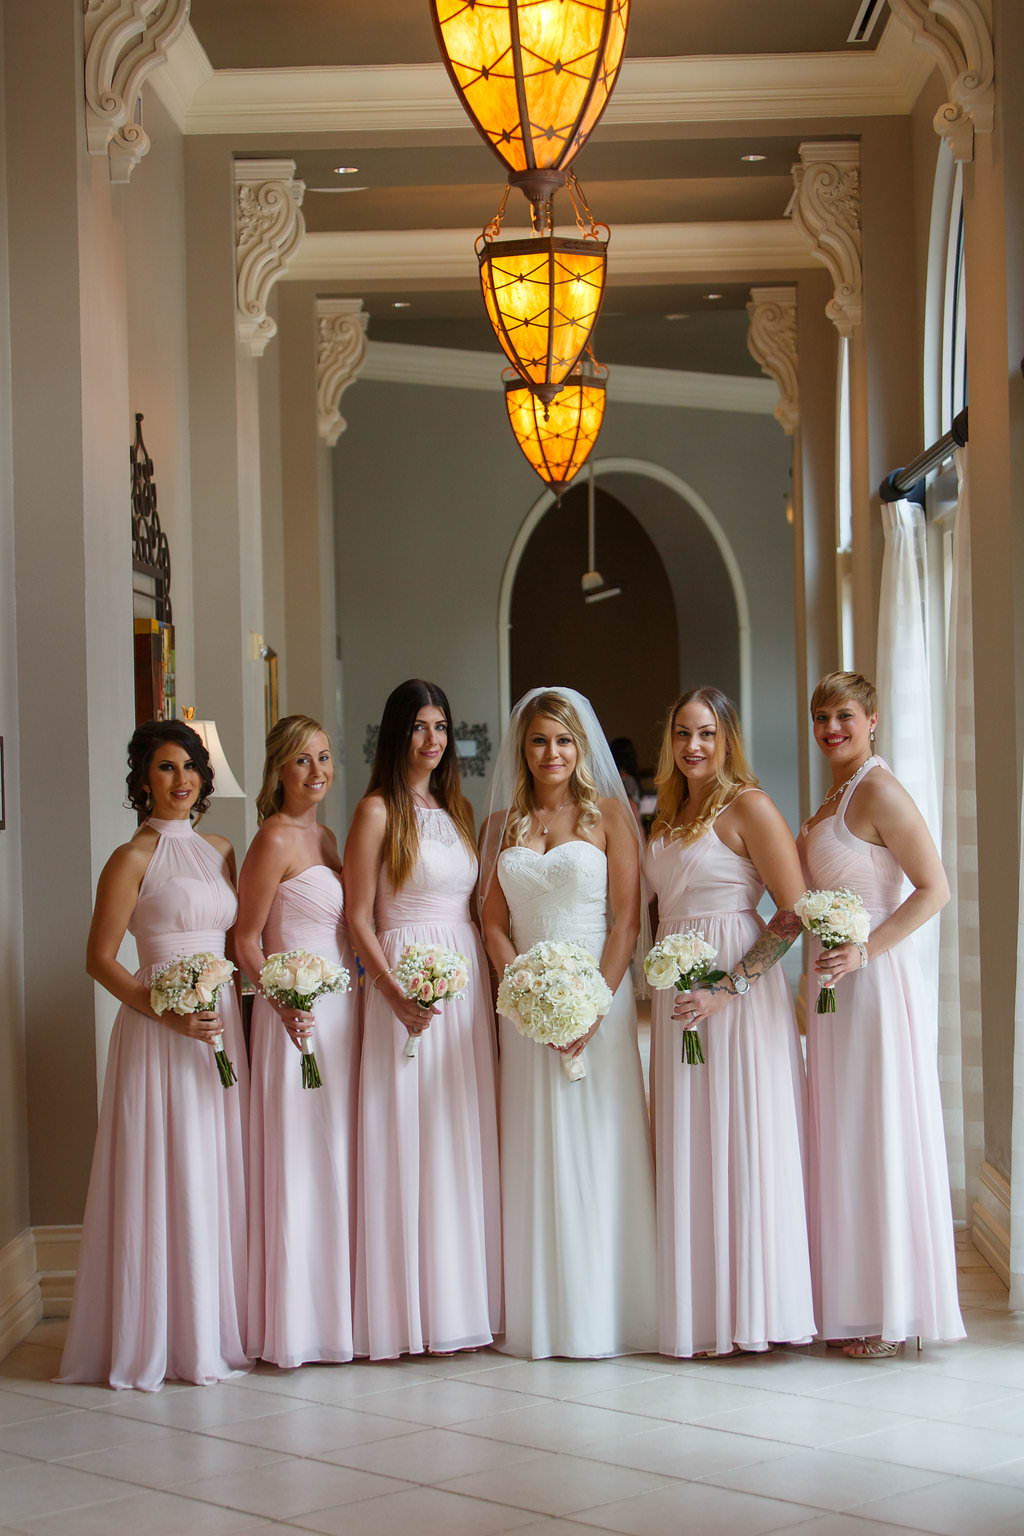 Indoor Bridal Party Portrait, Bride in Strapless Column Wedding Dress, Bridesmaids in Mismatched Blush Pink Floorlength Dresses, with White Floral Bouquets | Hotel Wedding Venue The Tampa Renaissance International